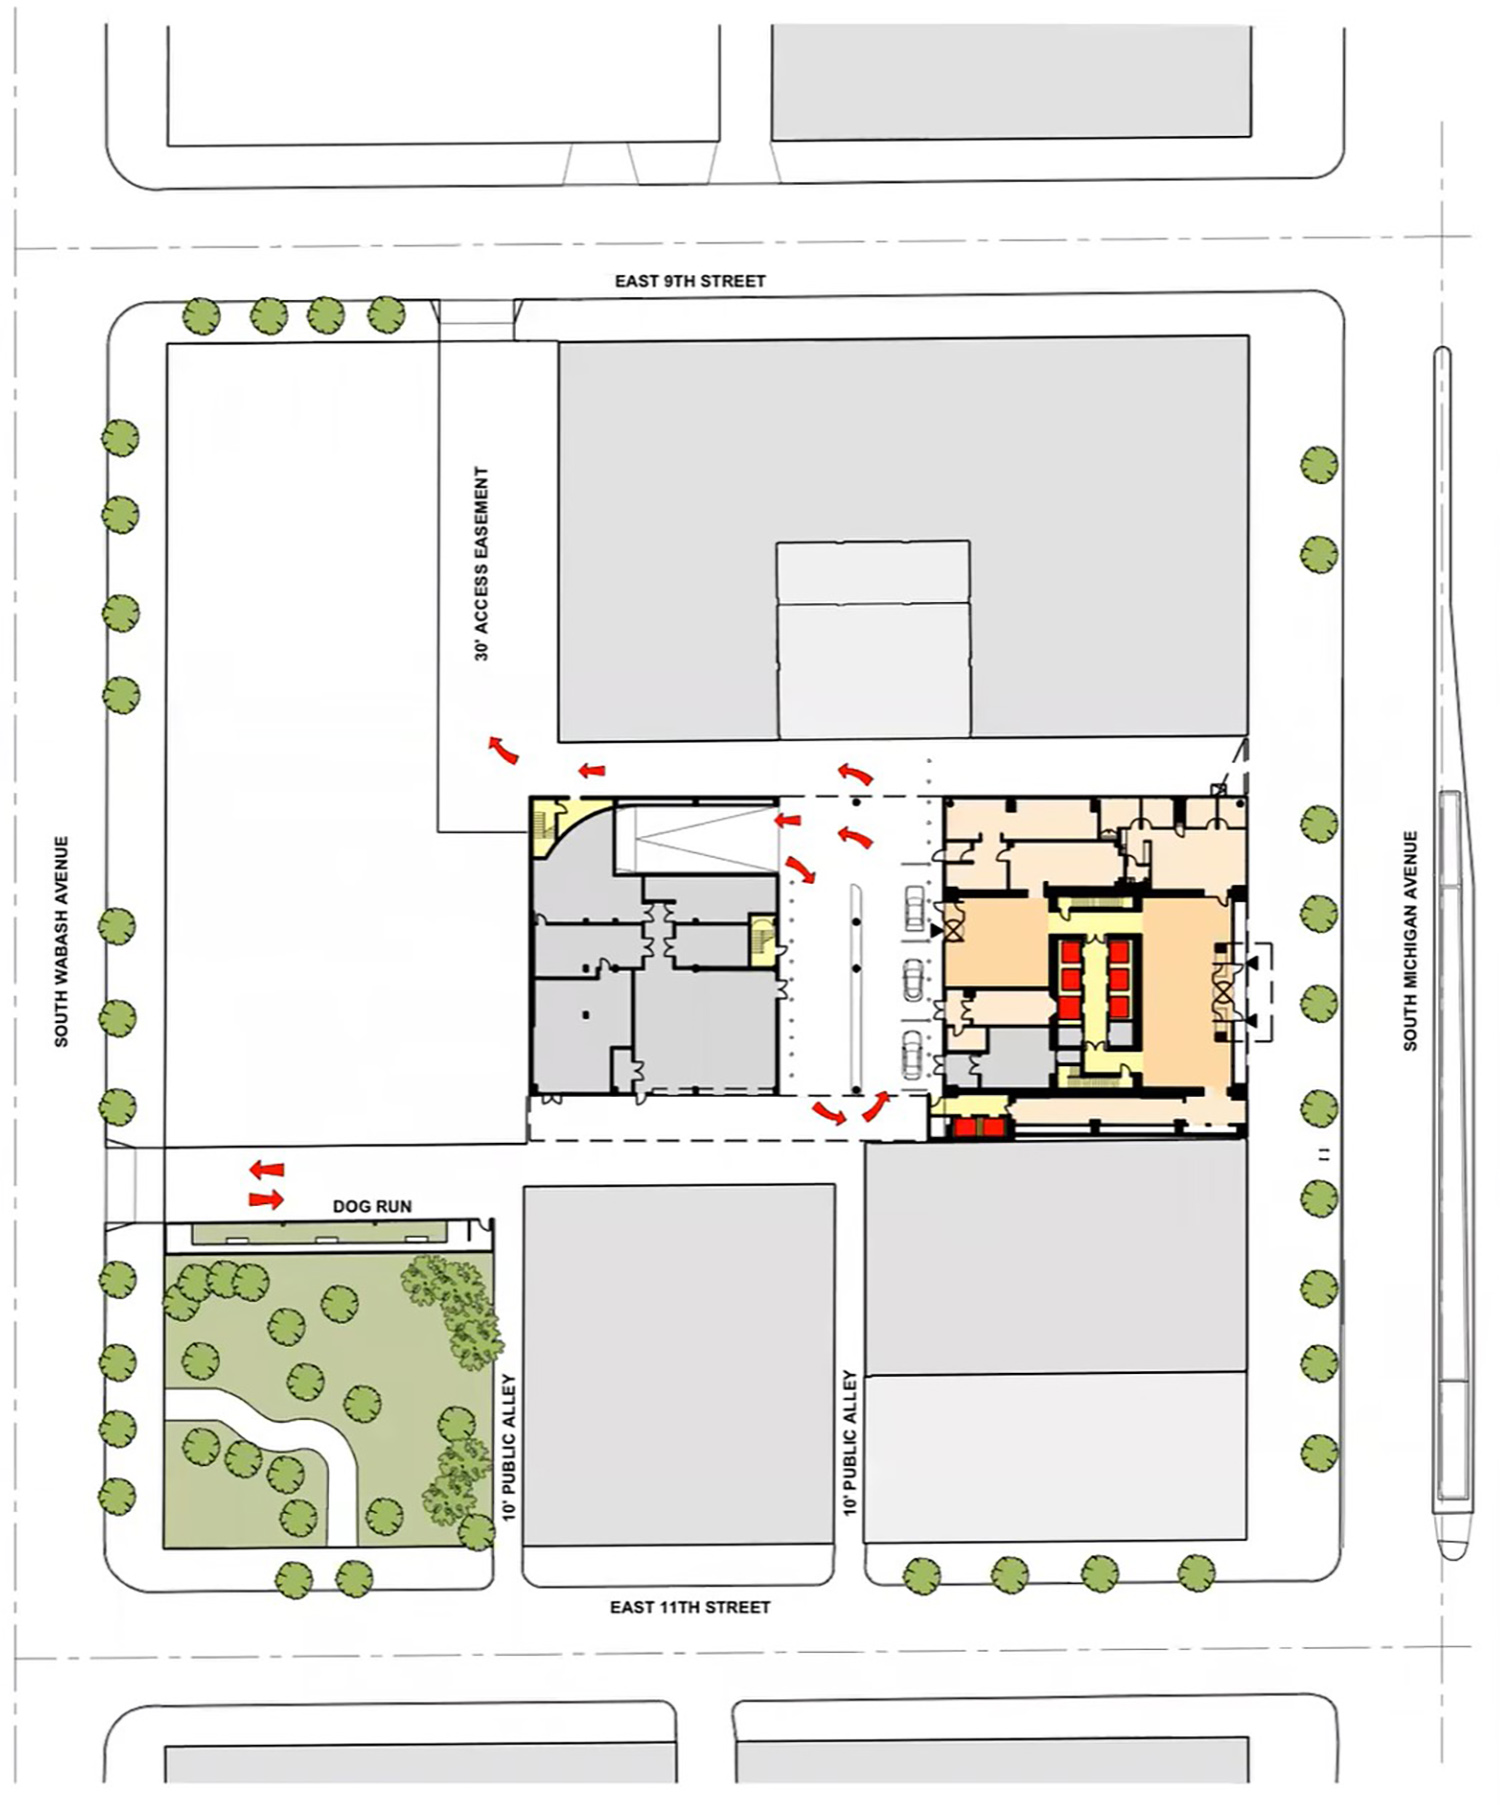 Site Plan for 1000M. Drawing by JAHN